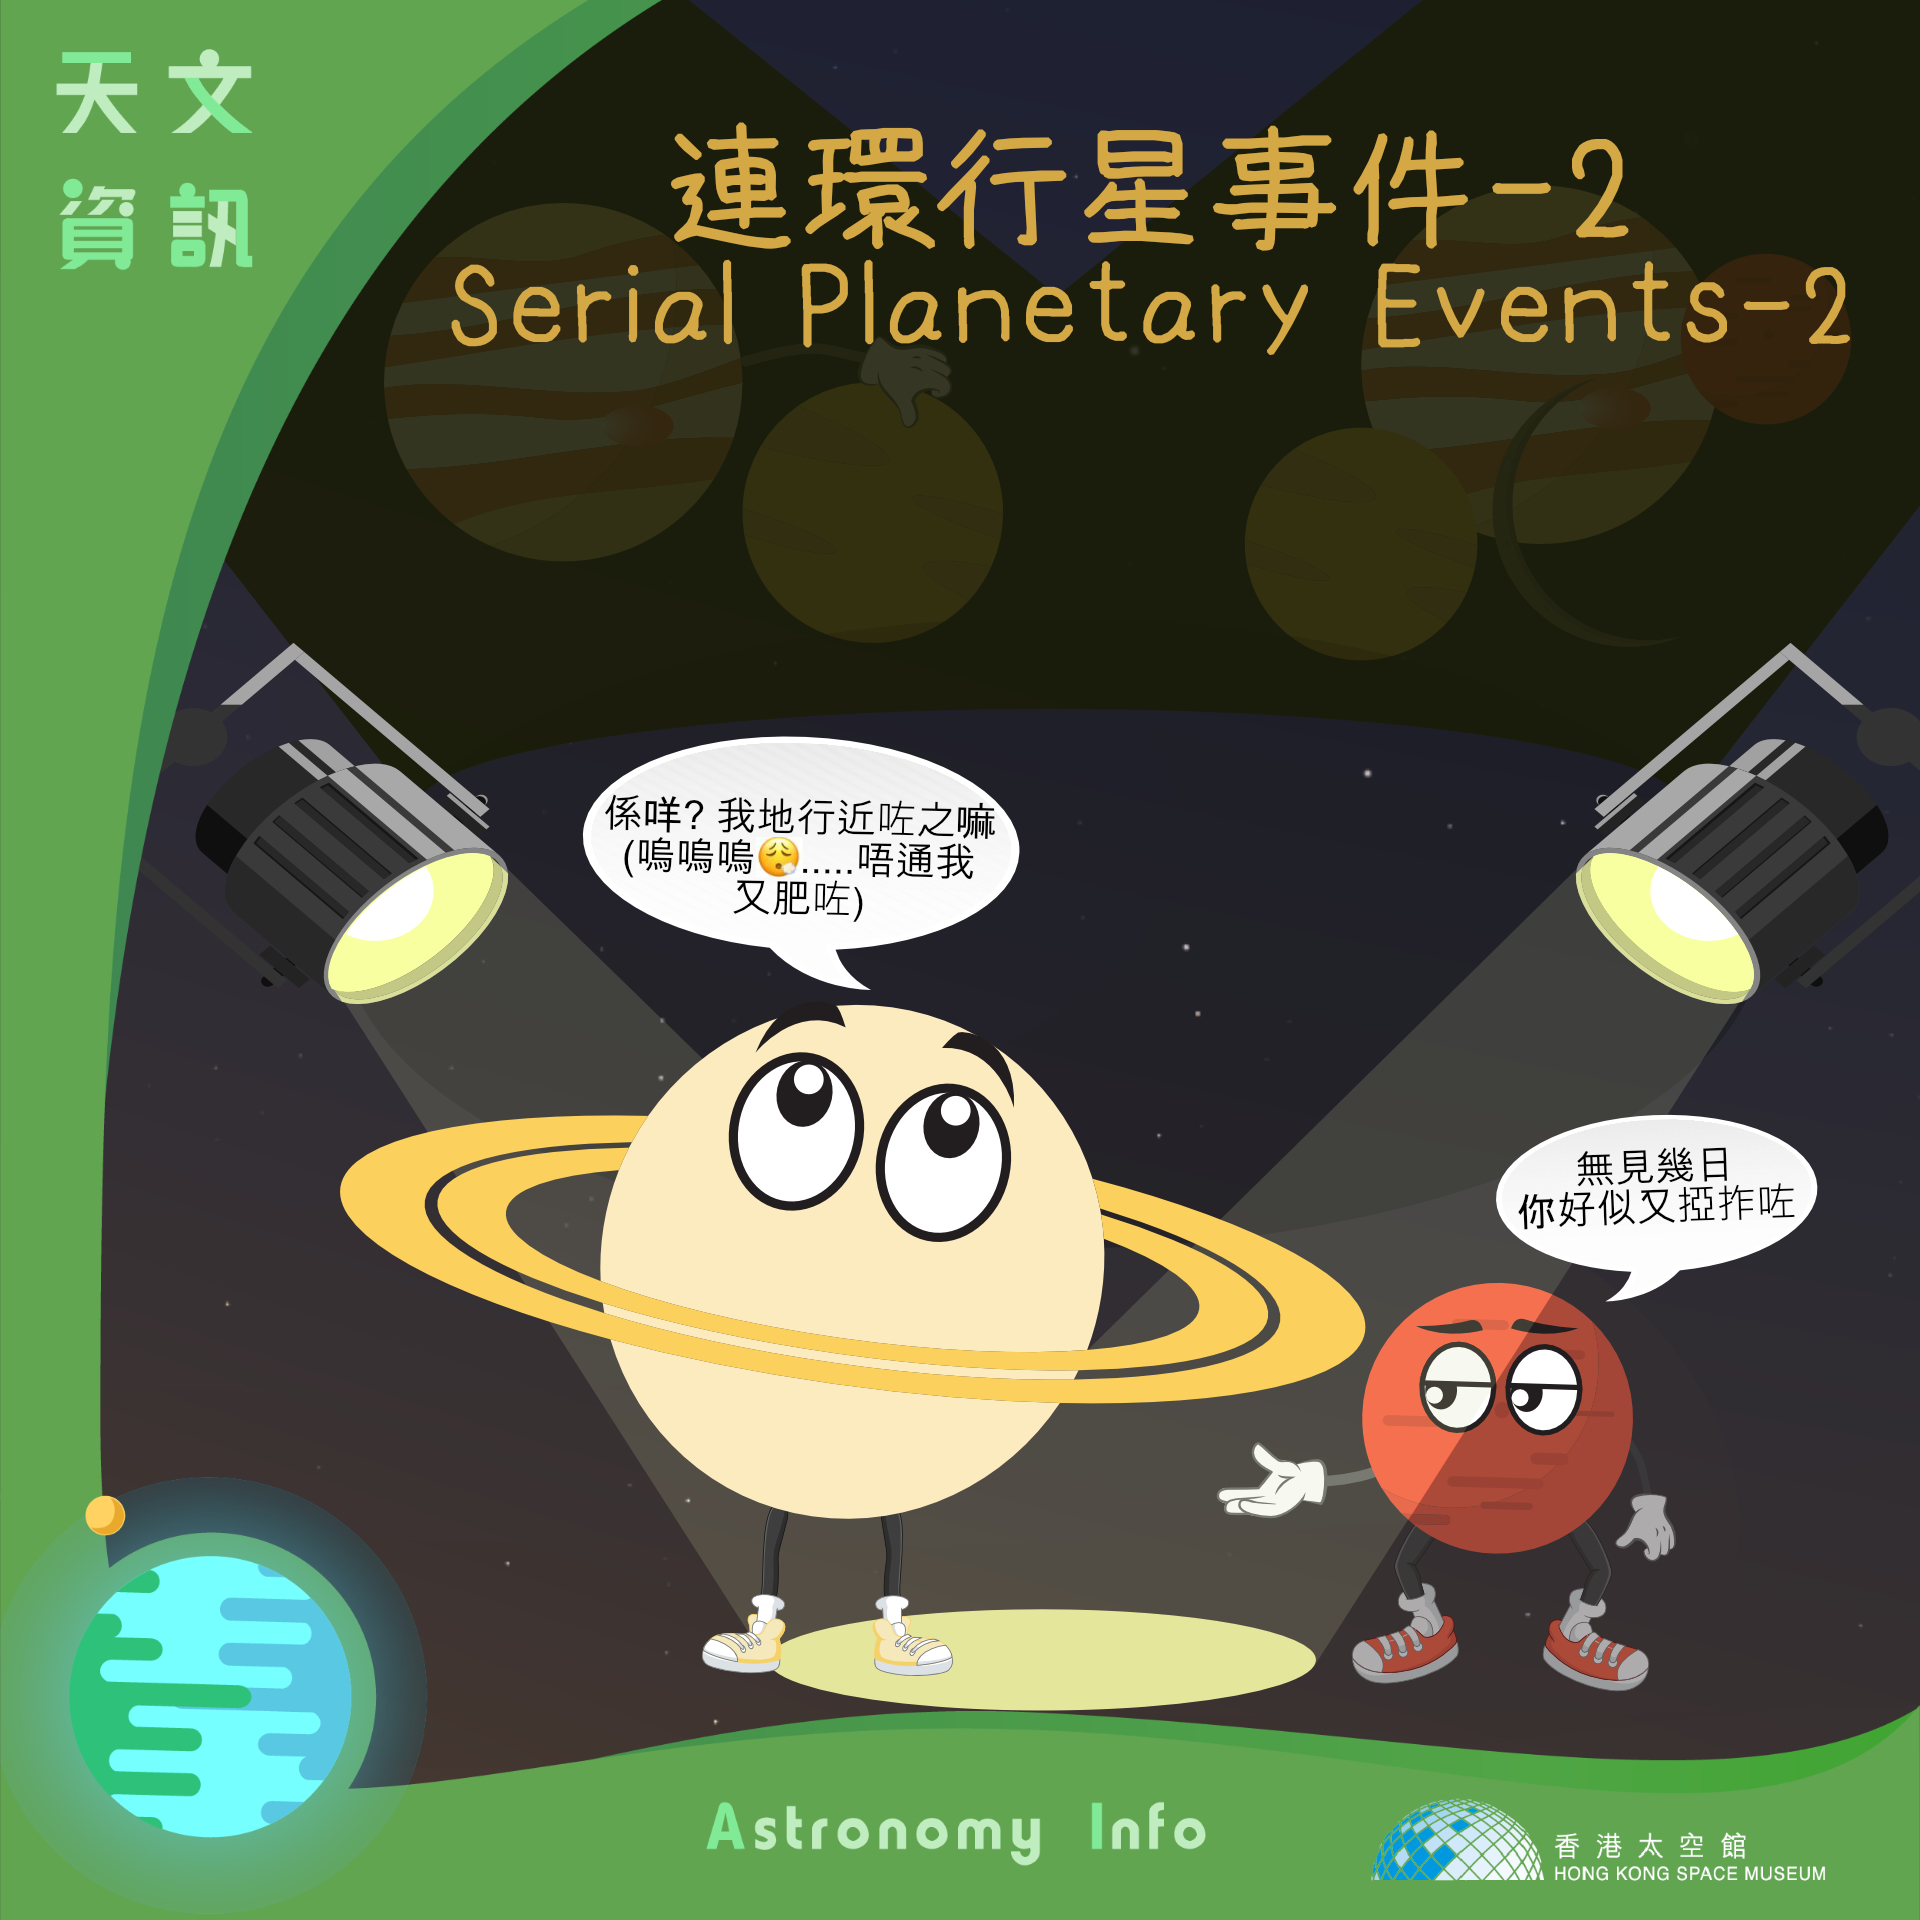 Serial Planetary Events — Second Event: Mars-Saturn Conjunction